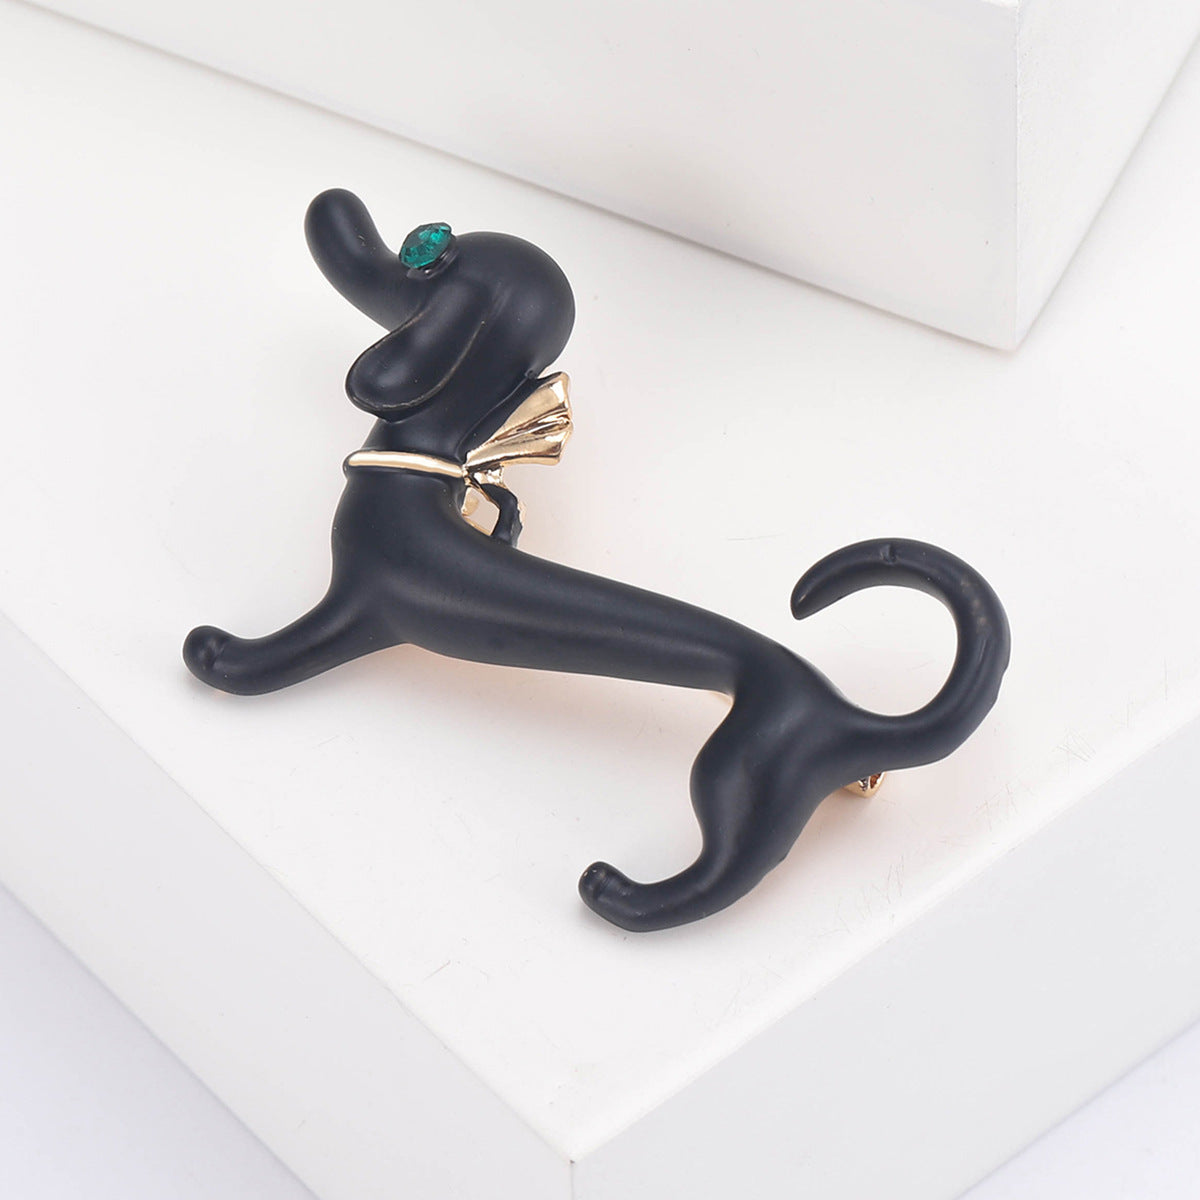 Cute Dripping Oil Sausage Dog Animal Pin Simple Same Style Breastpin Ornament